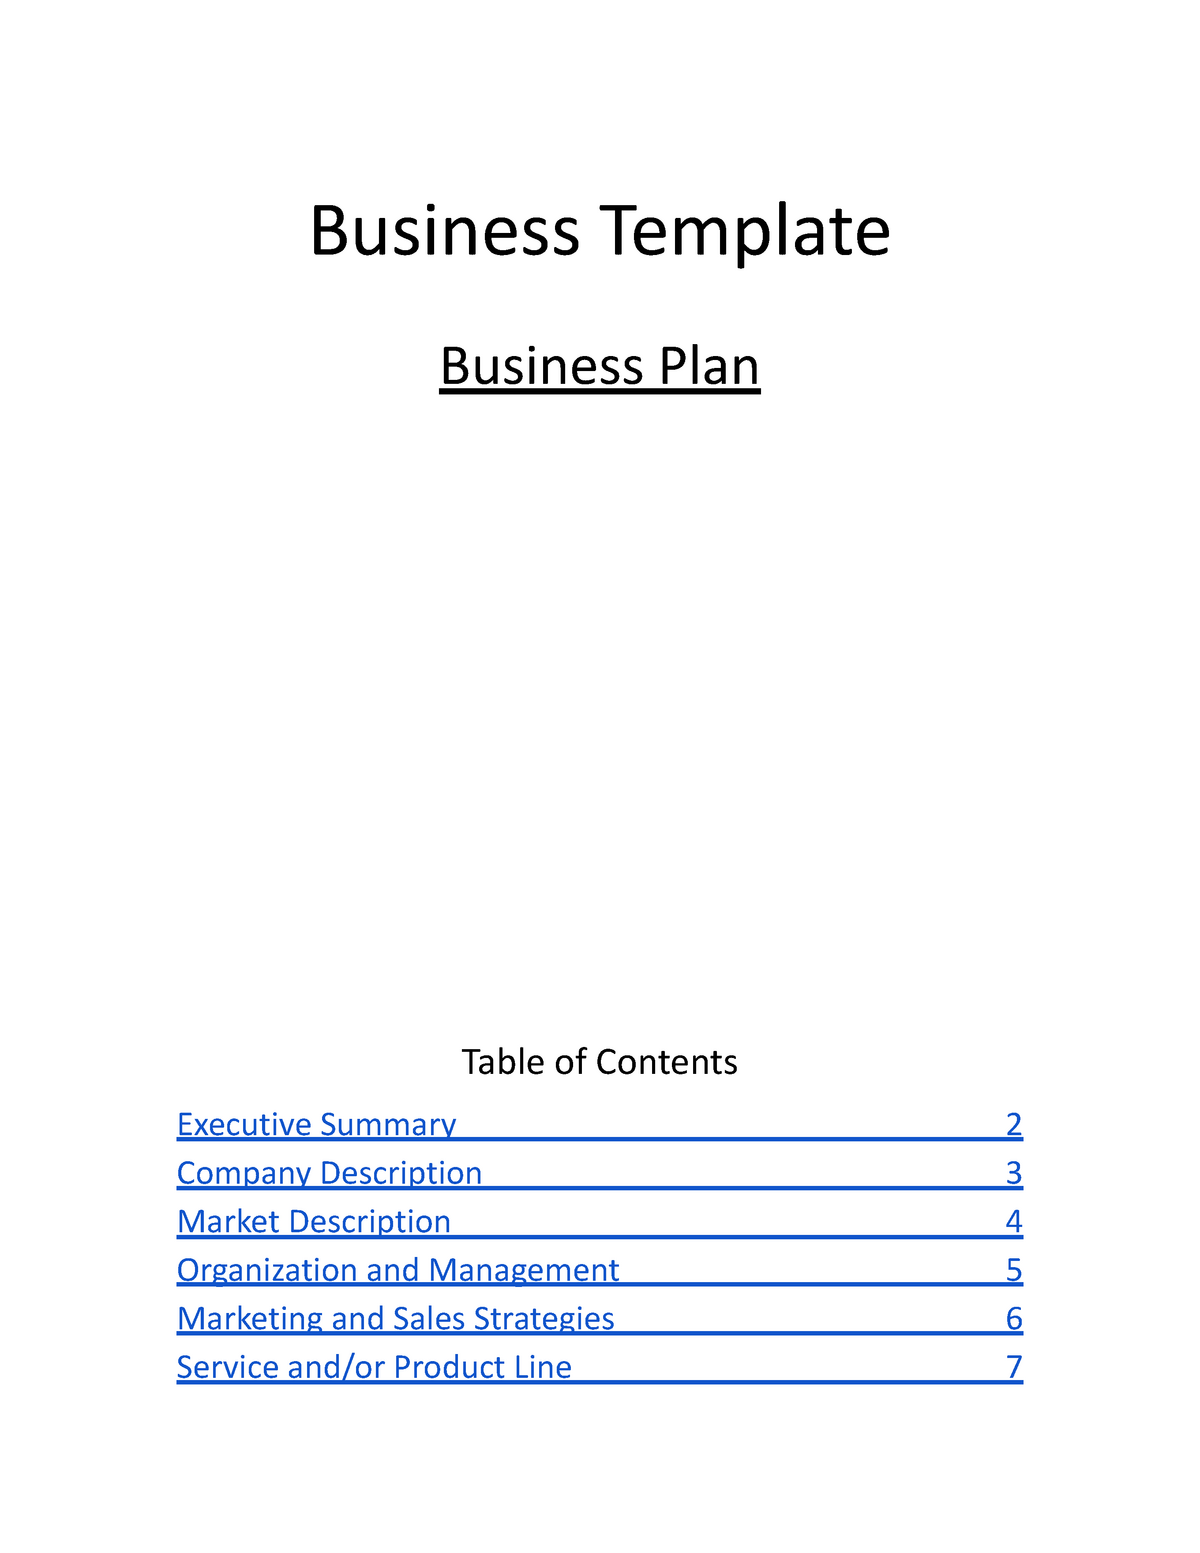 fast-food-restaurant-business-plan-template-download-in-word-google